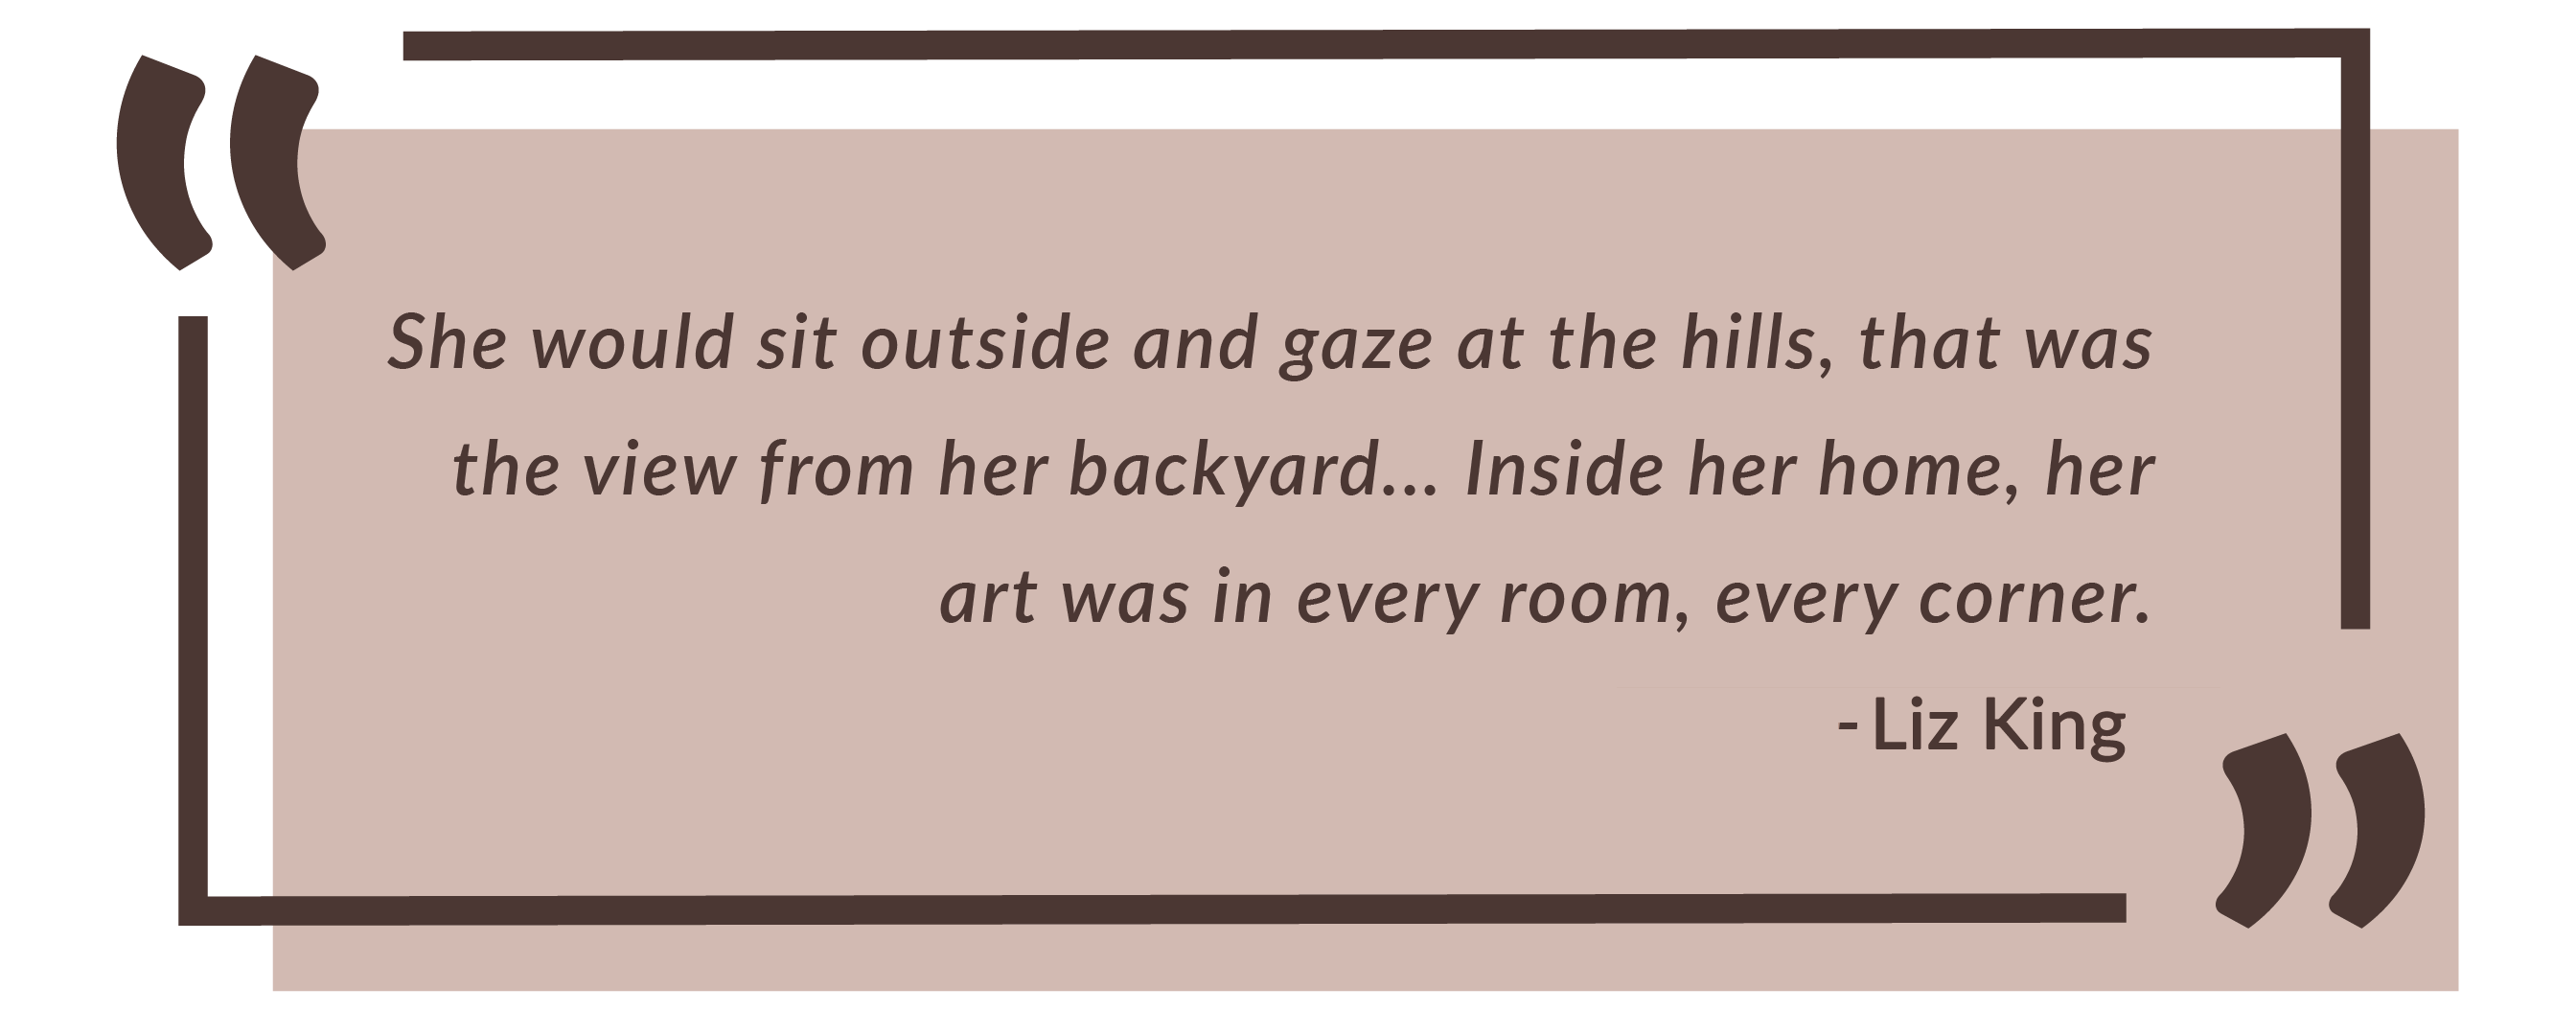 She would sit outside and gaze at the hills, that was the view from her backyard... Inside her home, her art was in every room, every corner. - Ted Nedderman